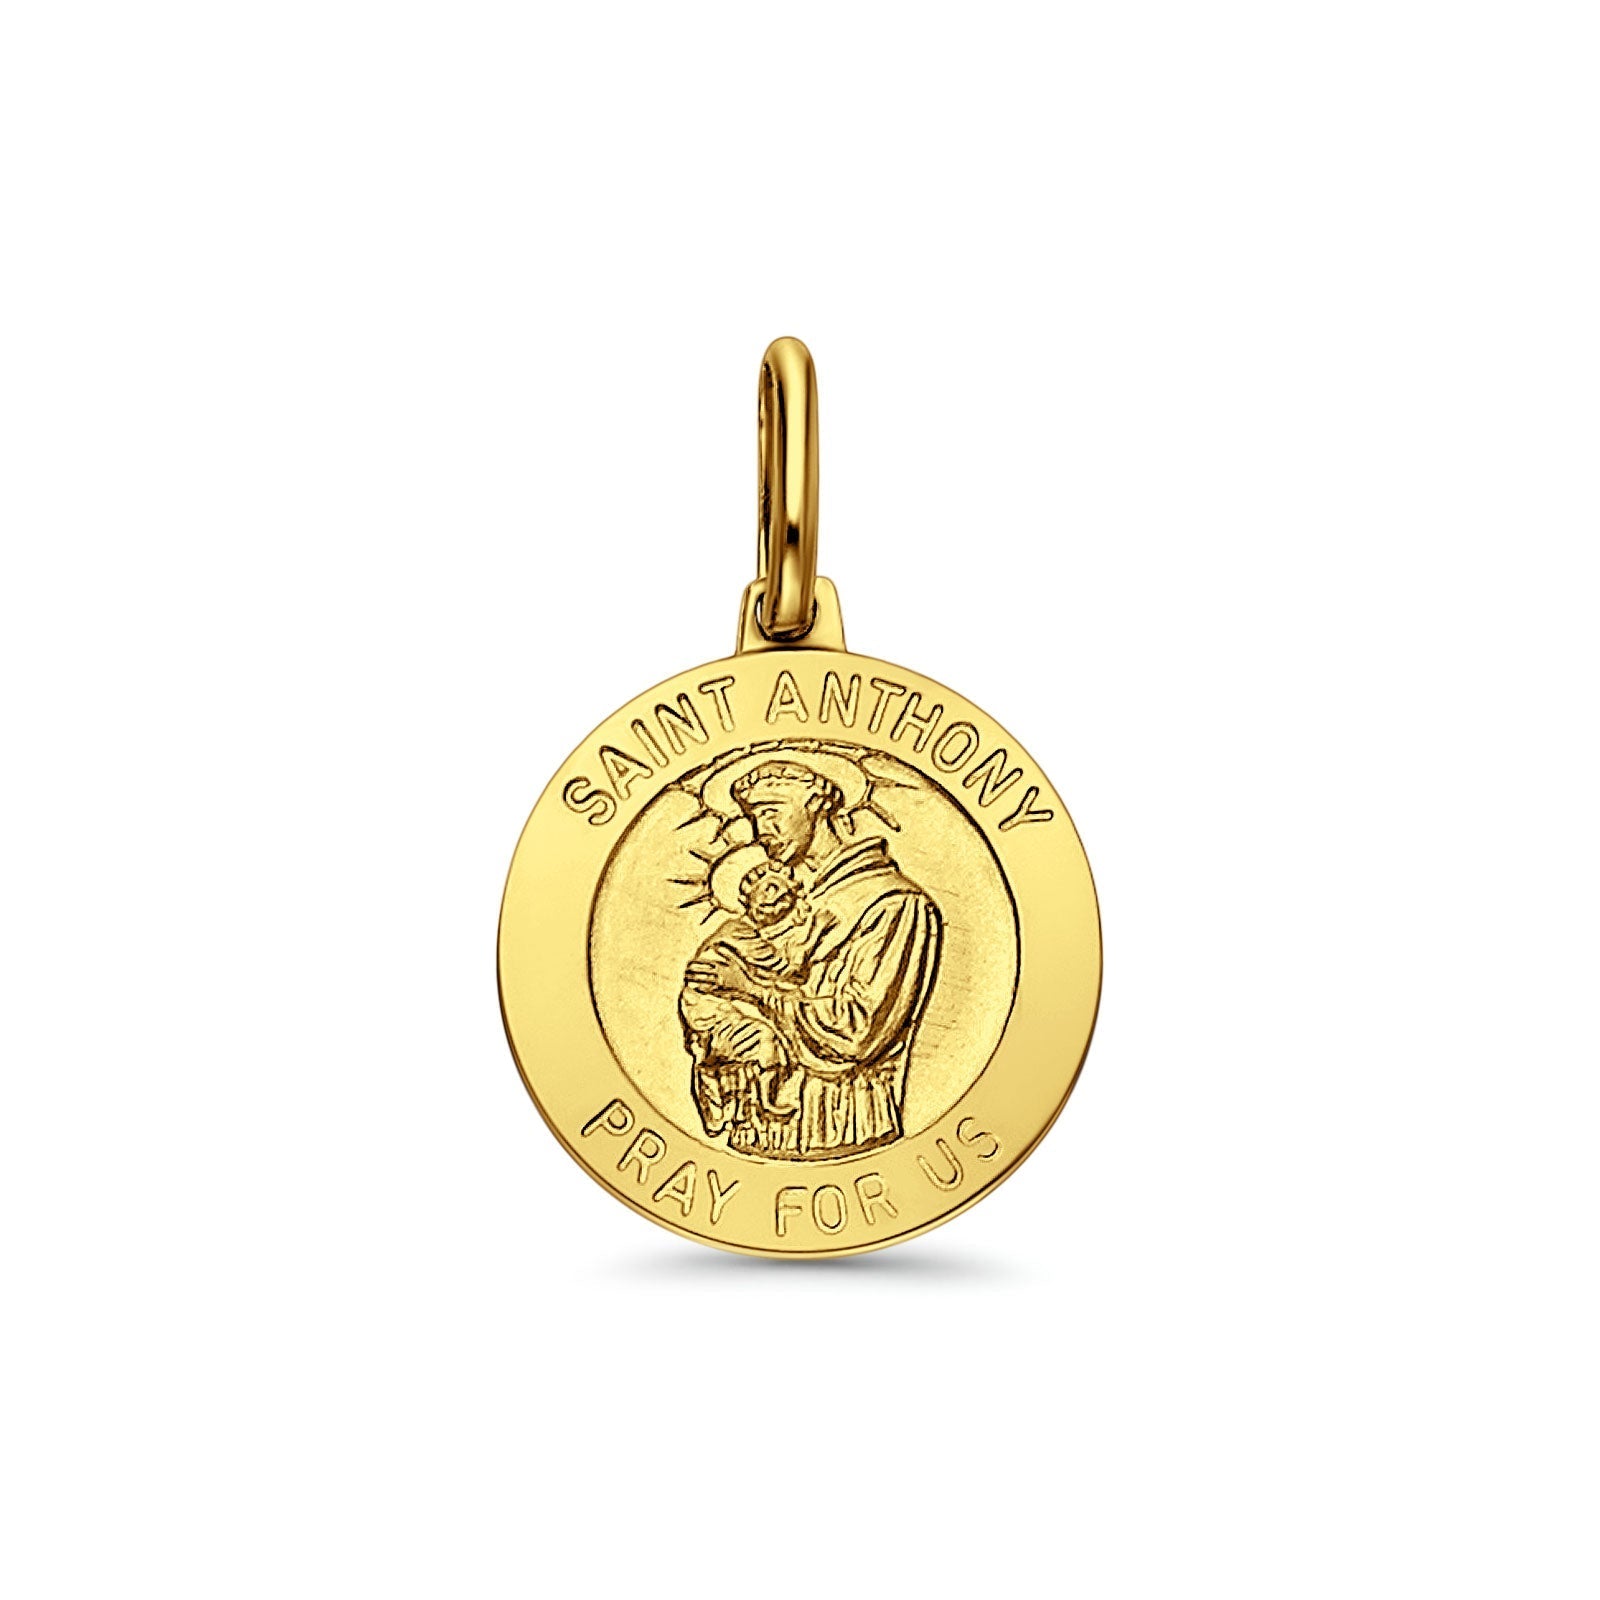 14K Yellow Gold St. Anthony Religious Pendant 18mmX18mm 2.0 grams